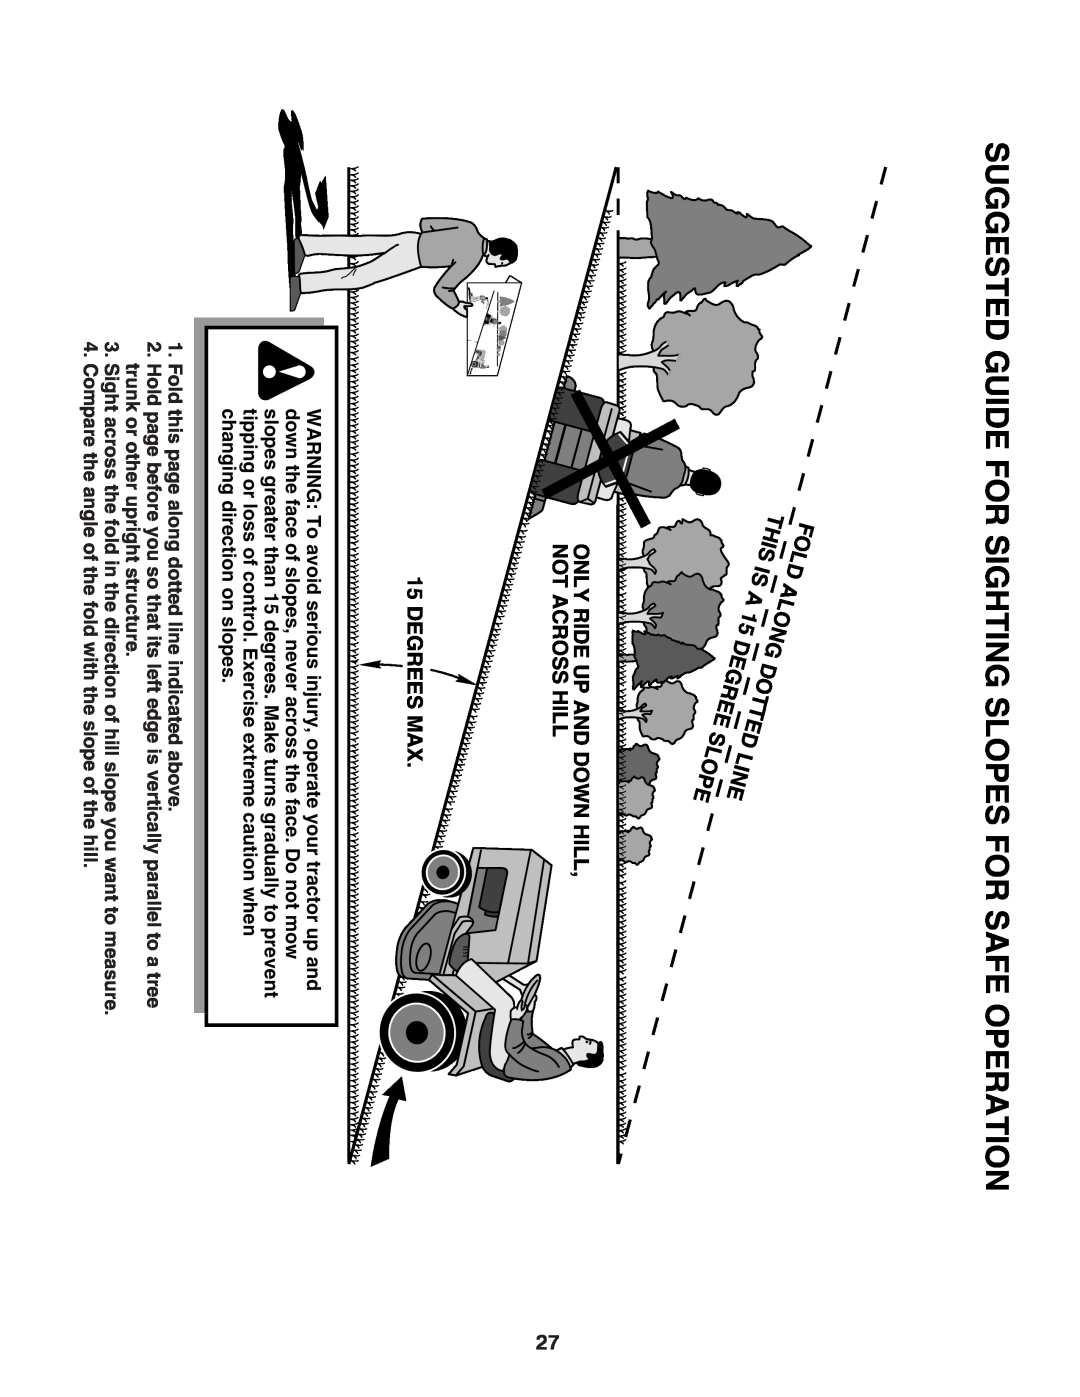 Poulan 96042012400, 438706 manual Suggested Guide For Sighting Slopes For Safe Operation 